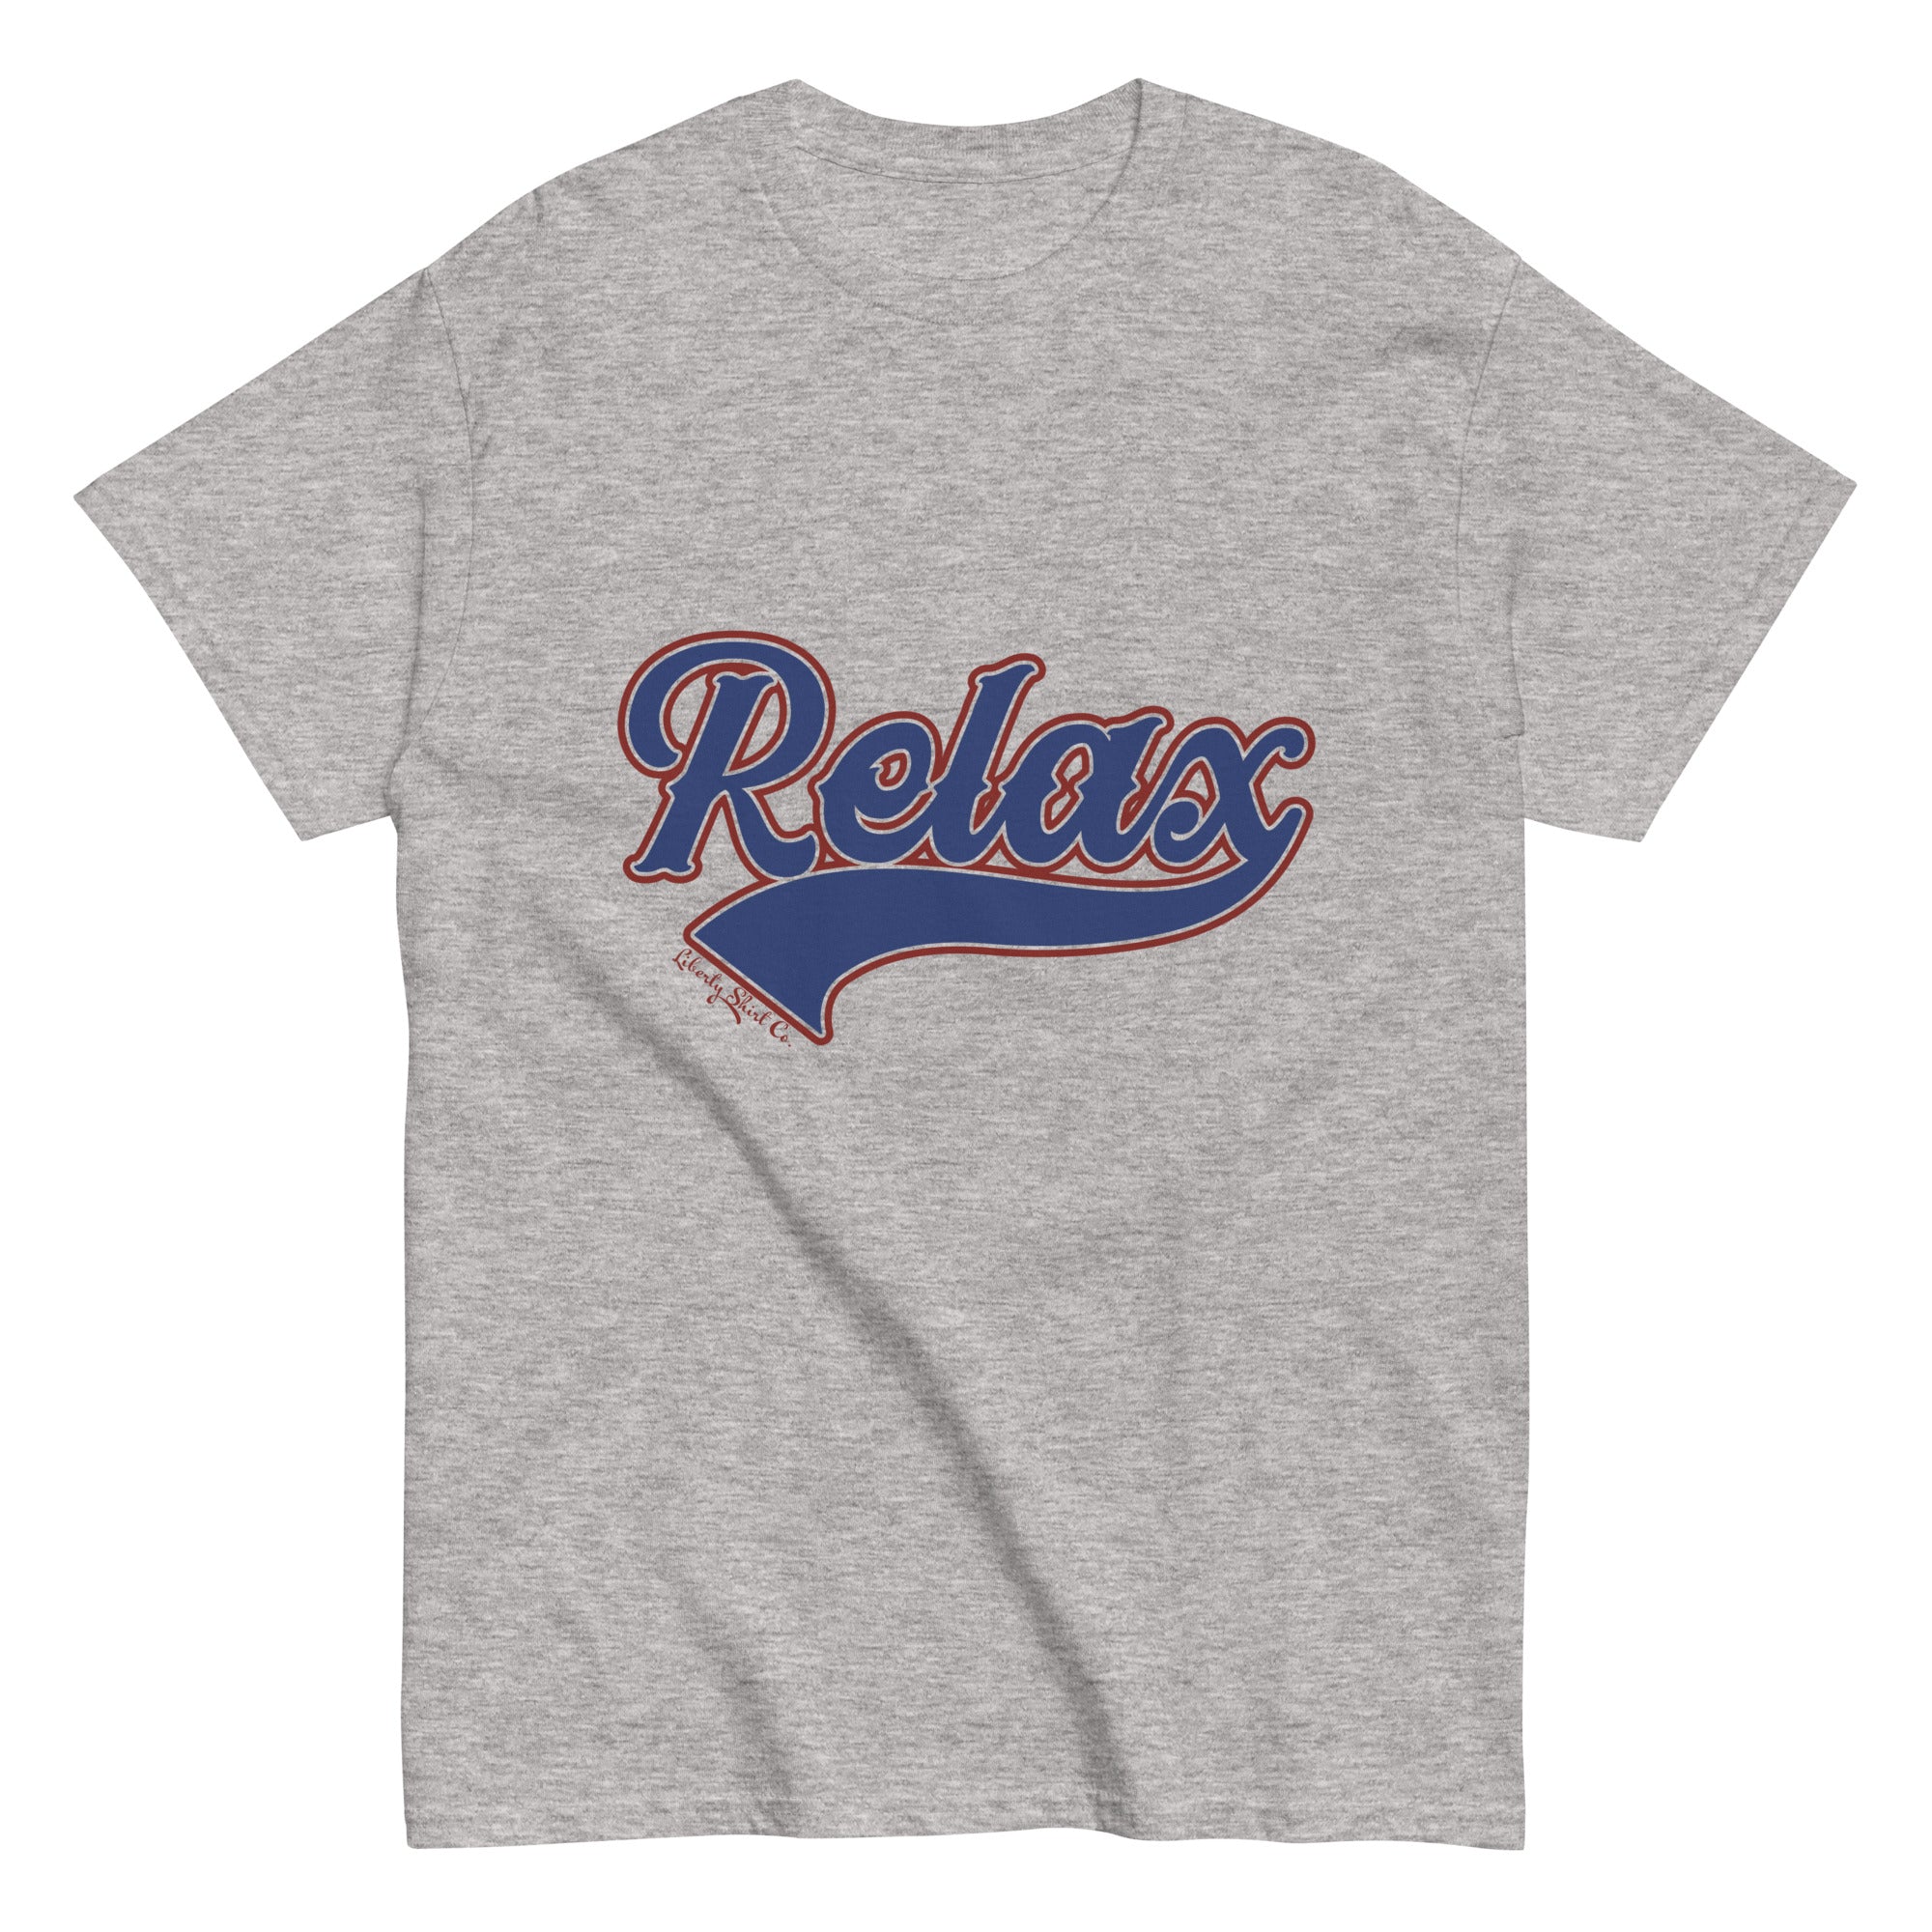 Relax Tee